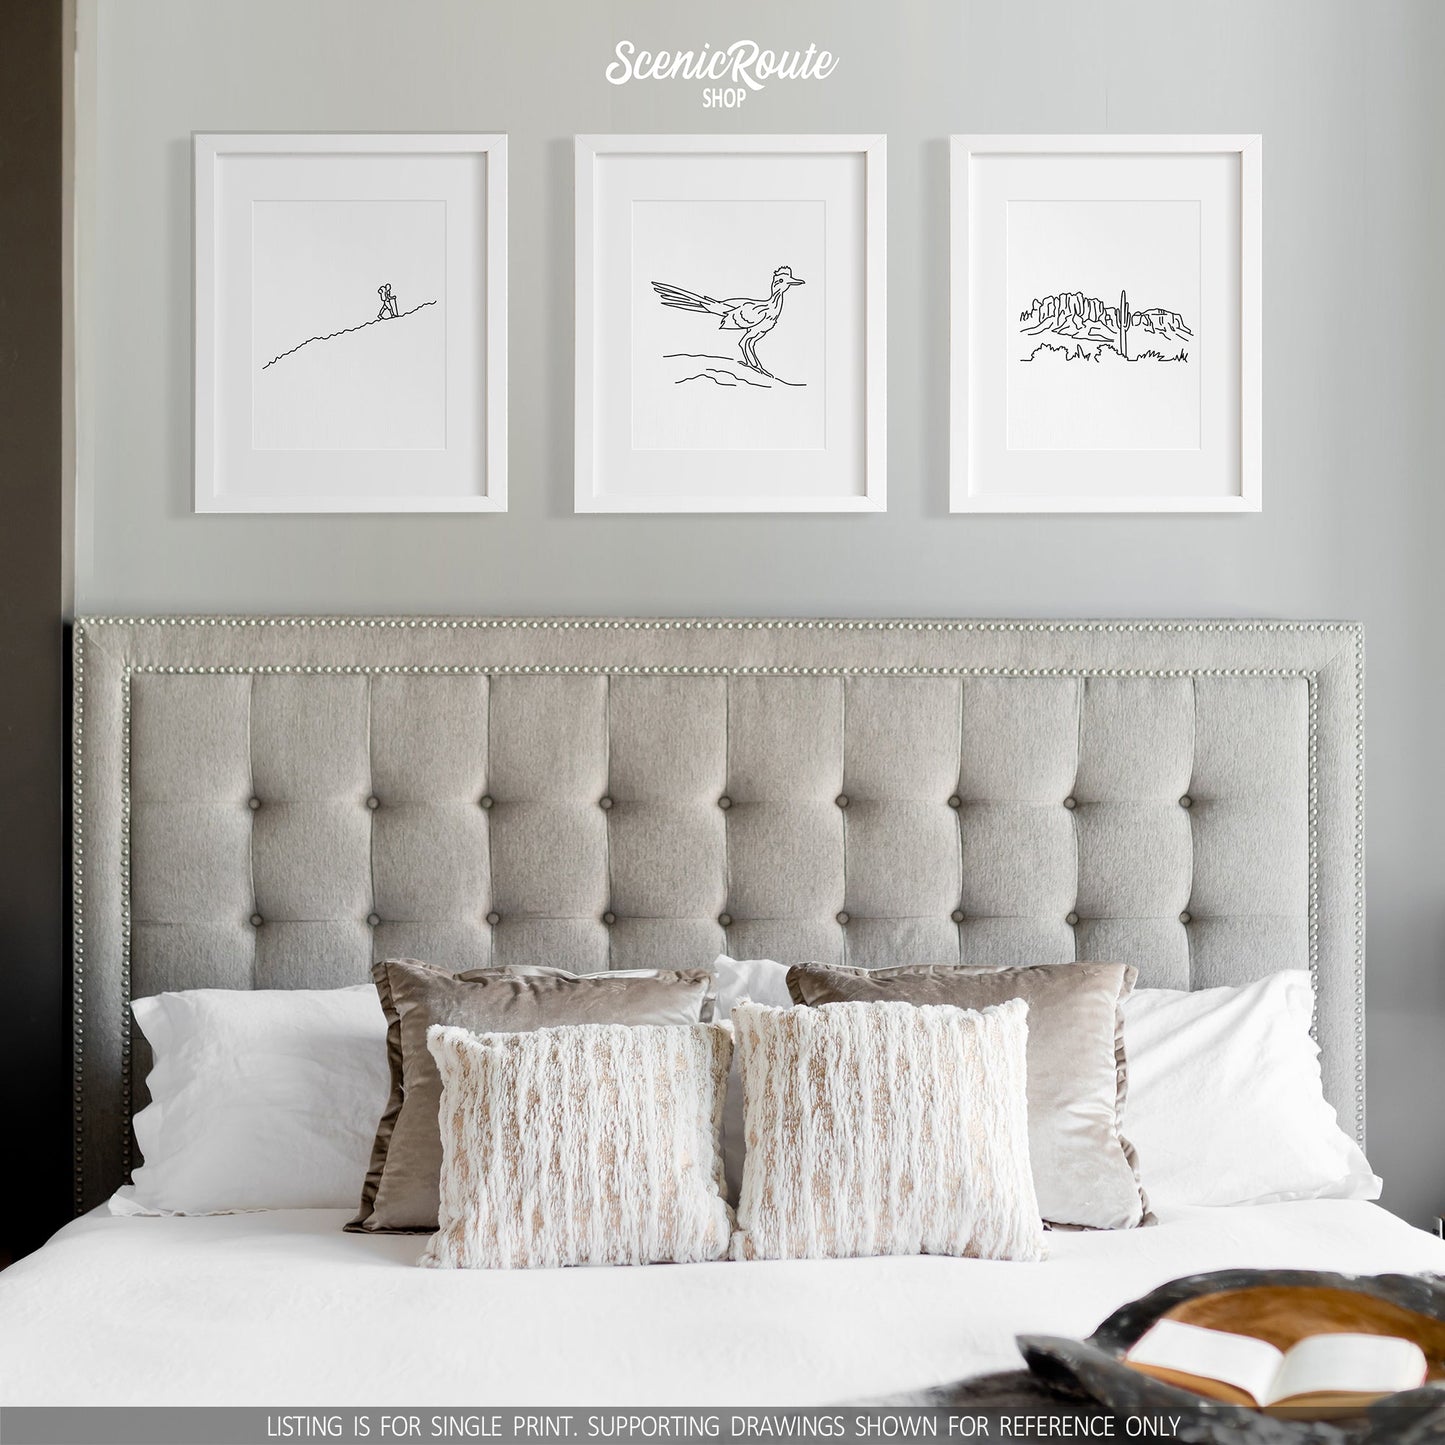 A group of three framed drawings on a white wall above a bed. The line art drawings include a person Hiking, a Roadrunner bird, and the Superstition Mountains